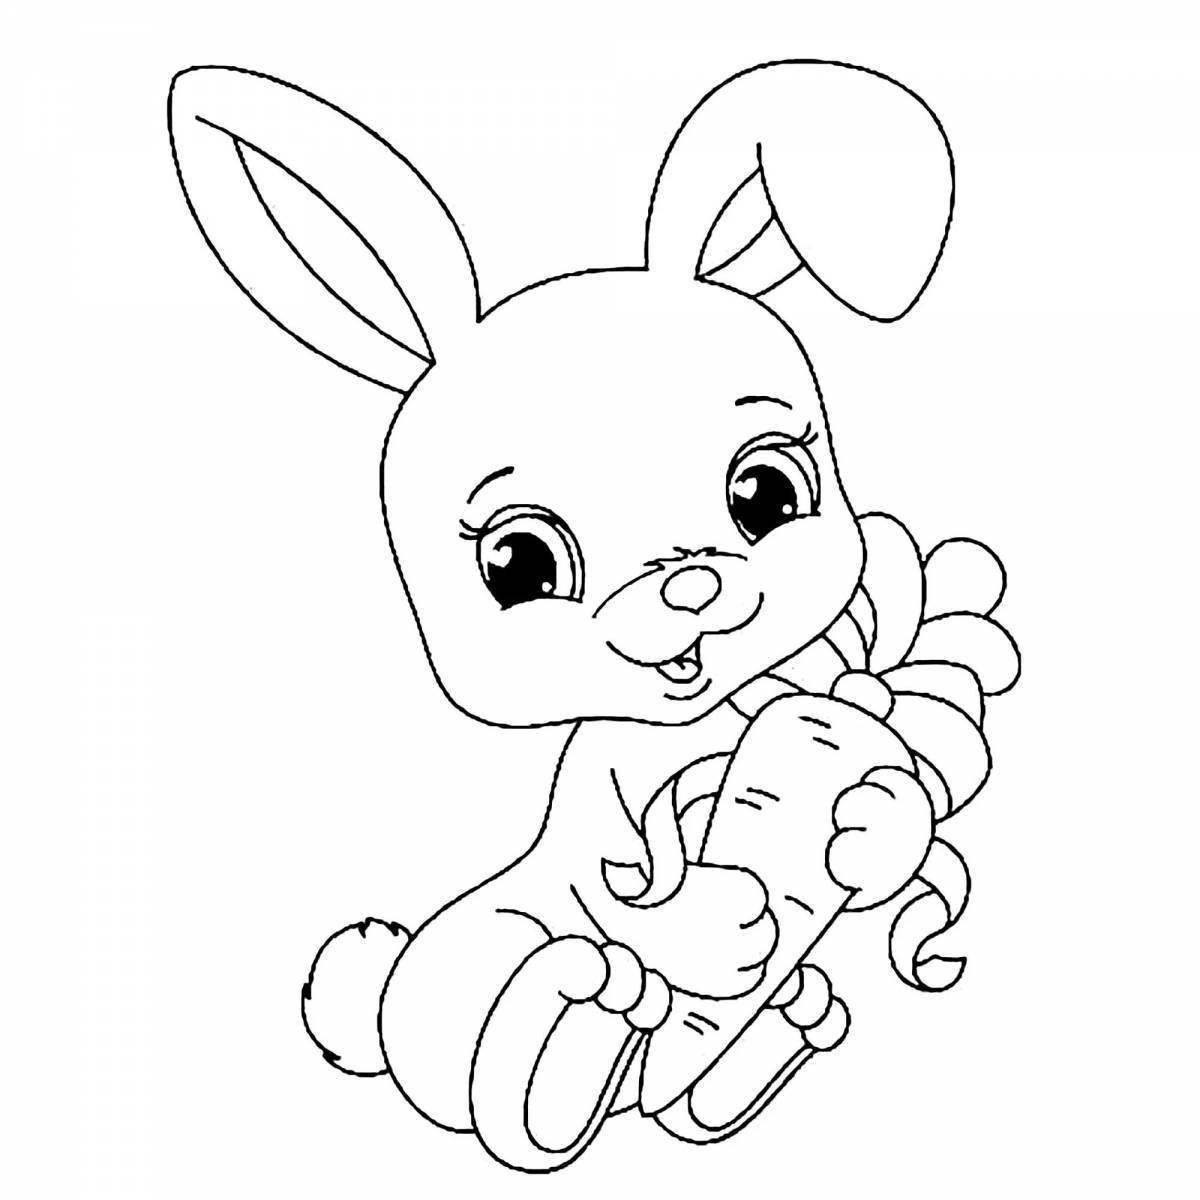 Cute little bunny coloring page